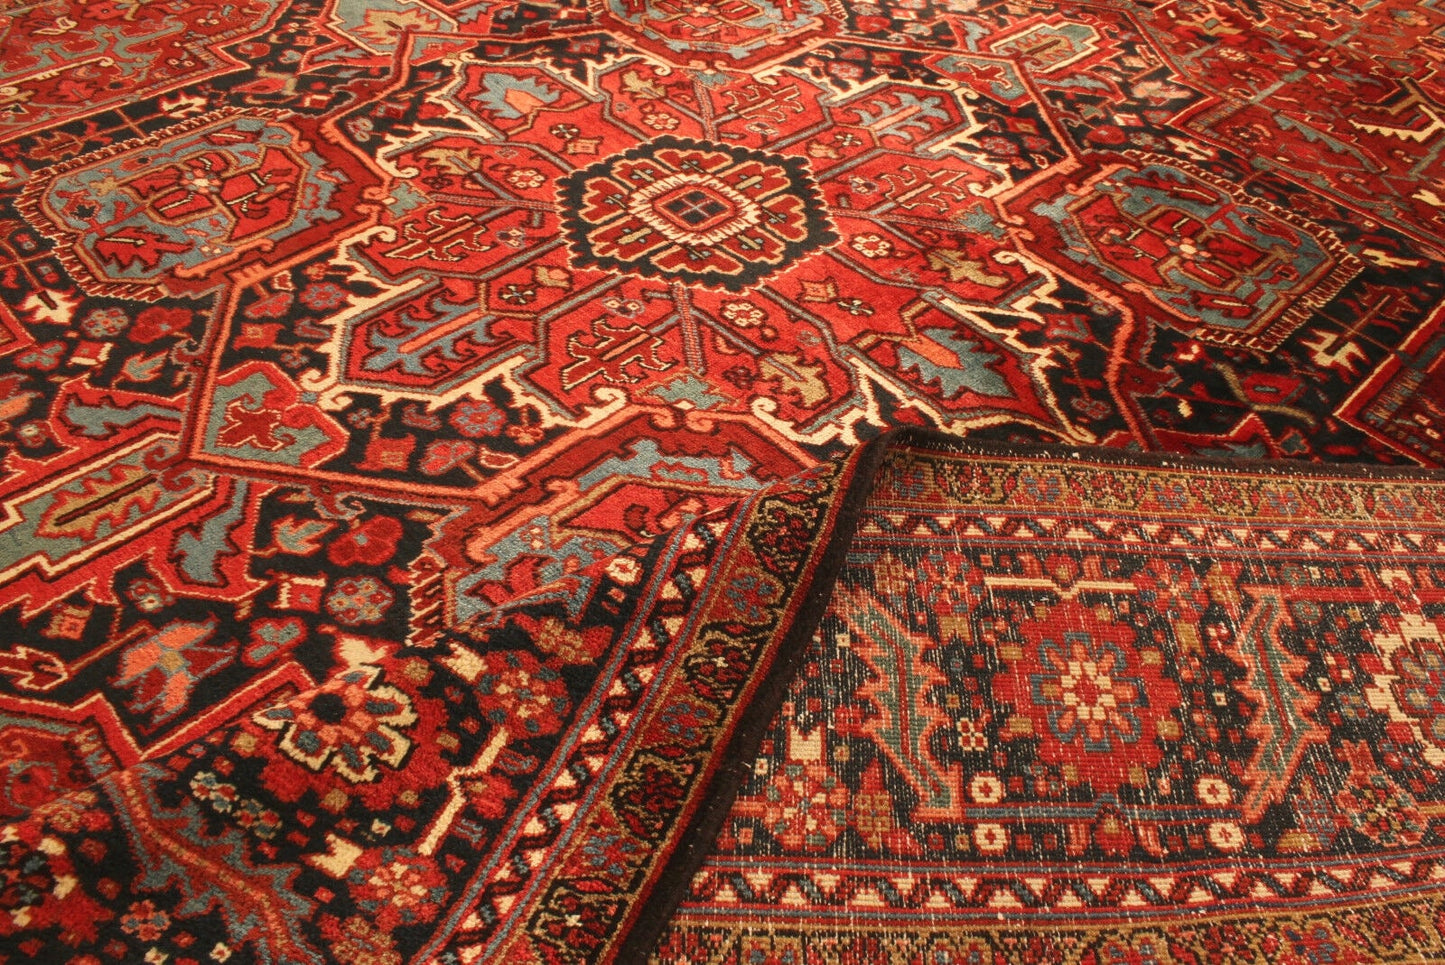 Front view of the Handmade Vintage Persian Style Heriz Rug highlighting design elements